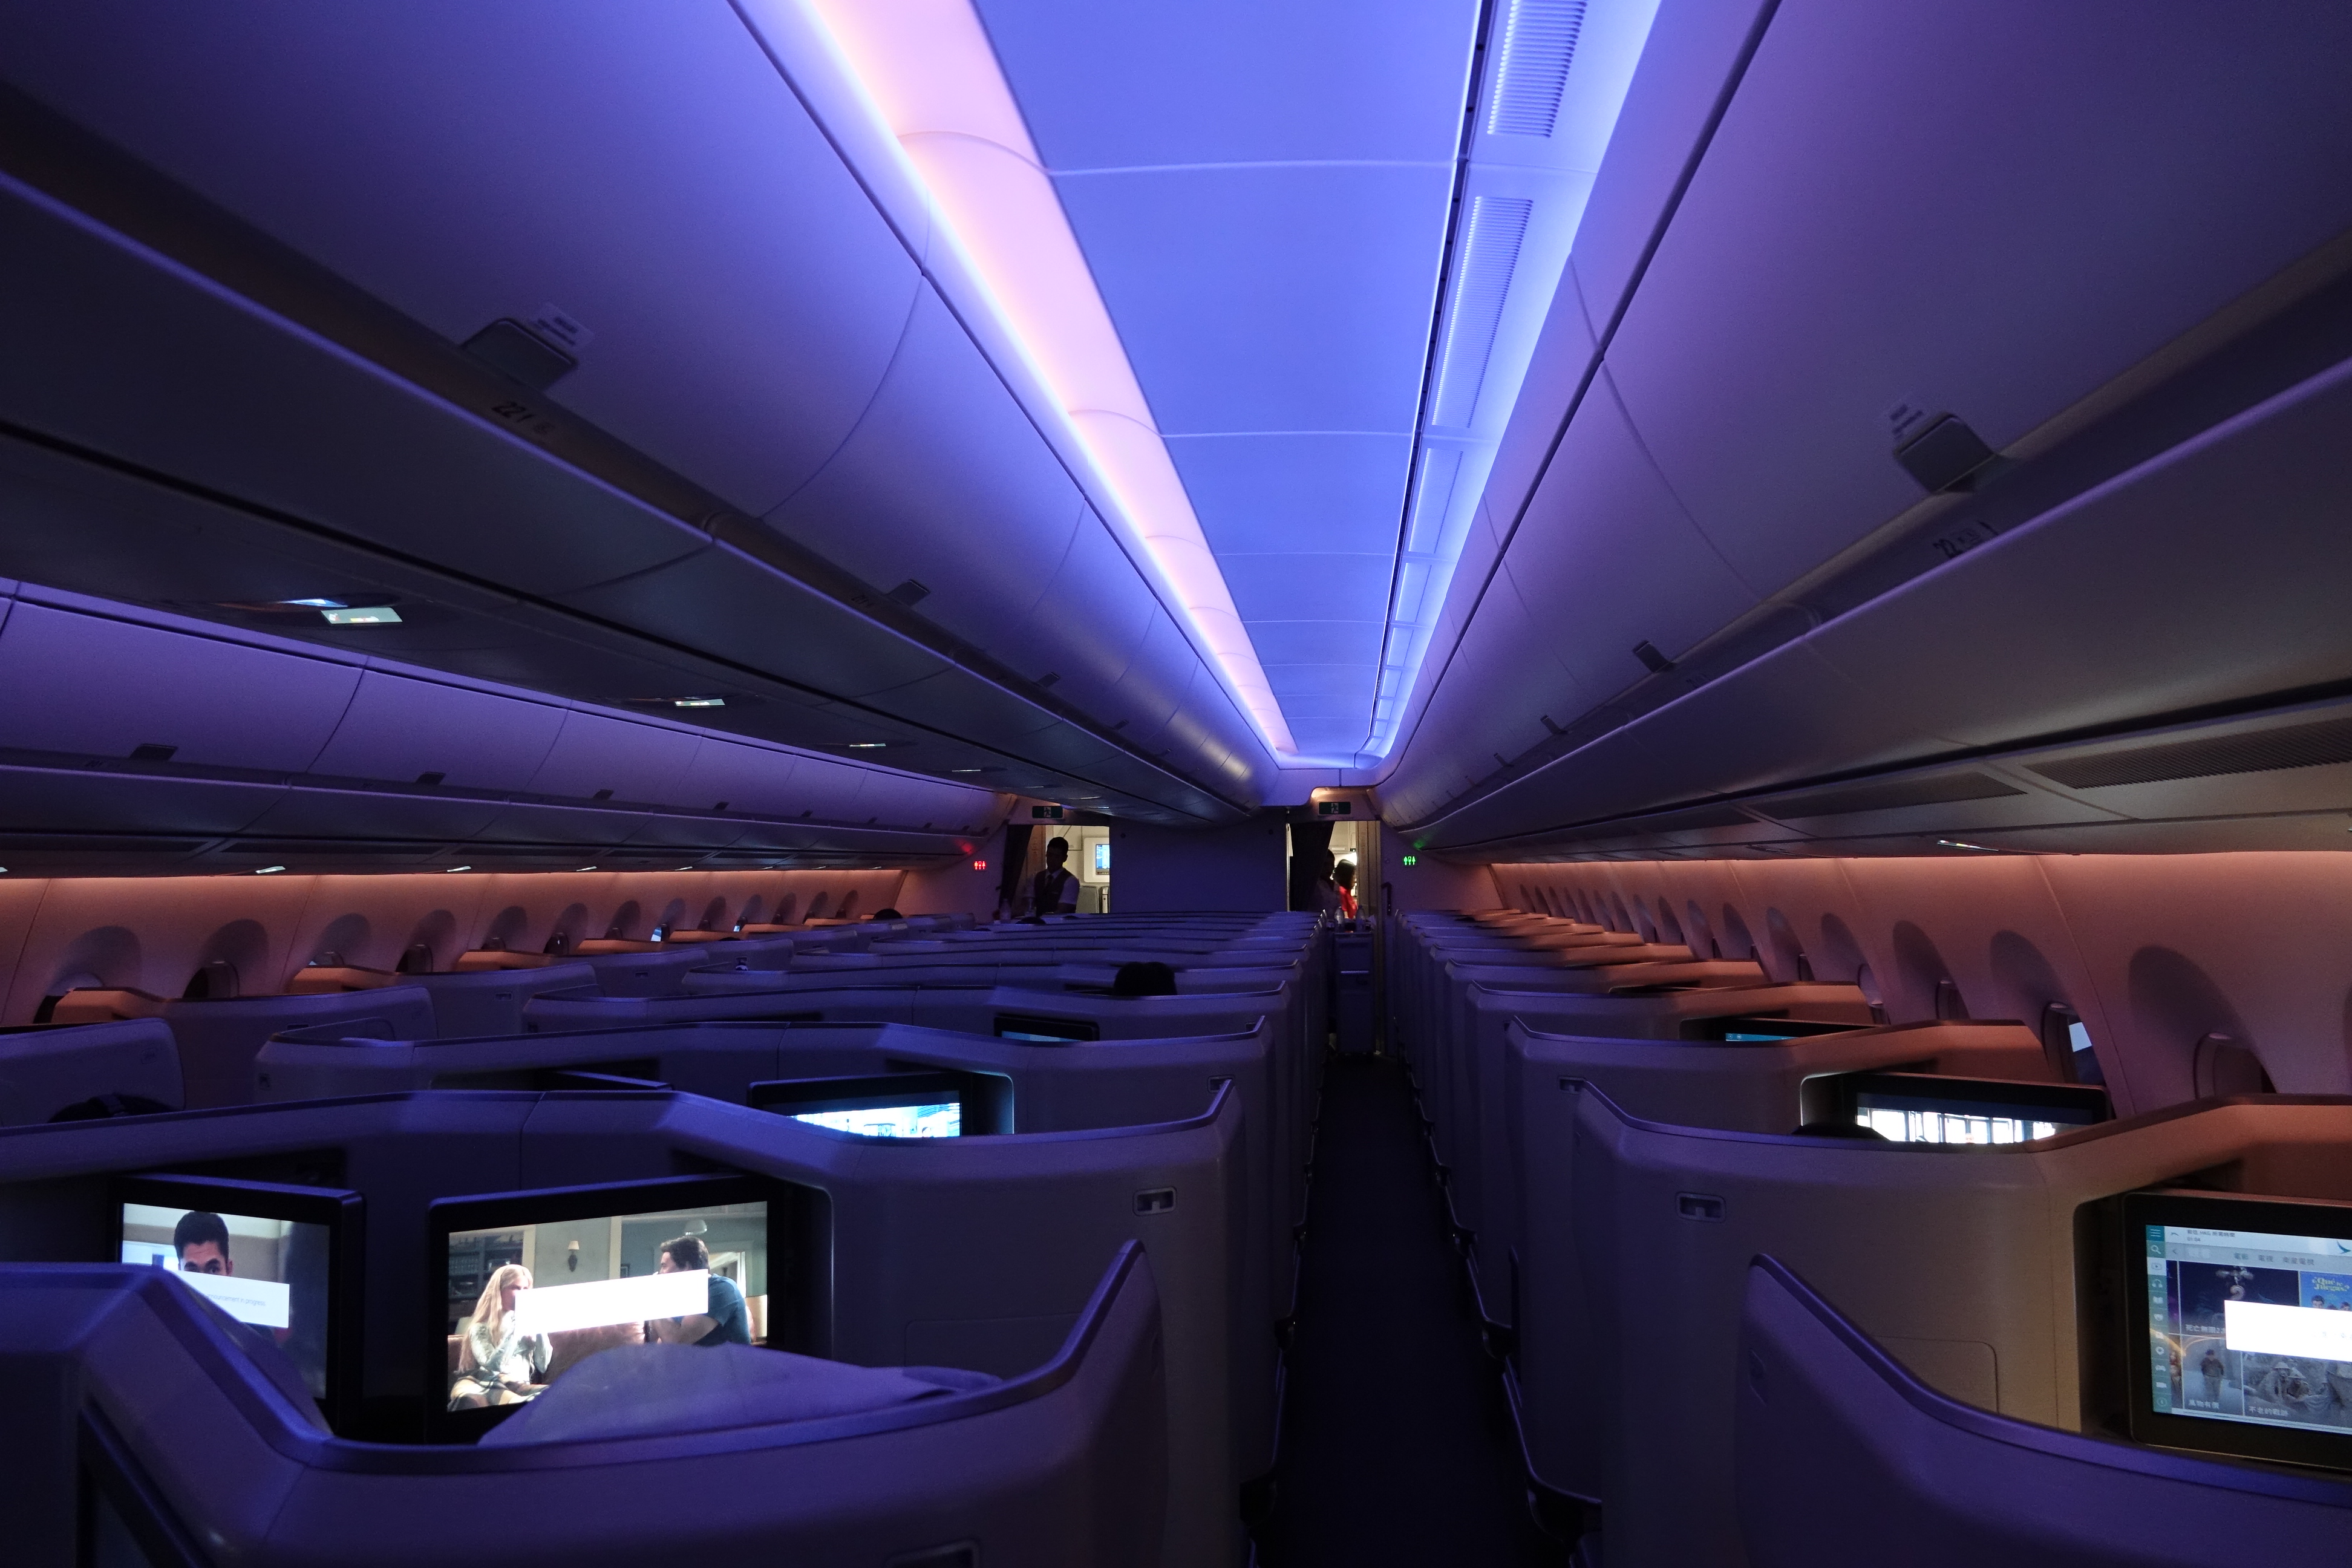 inside an airplane with rows of seats and a television